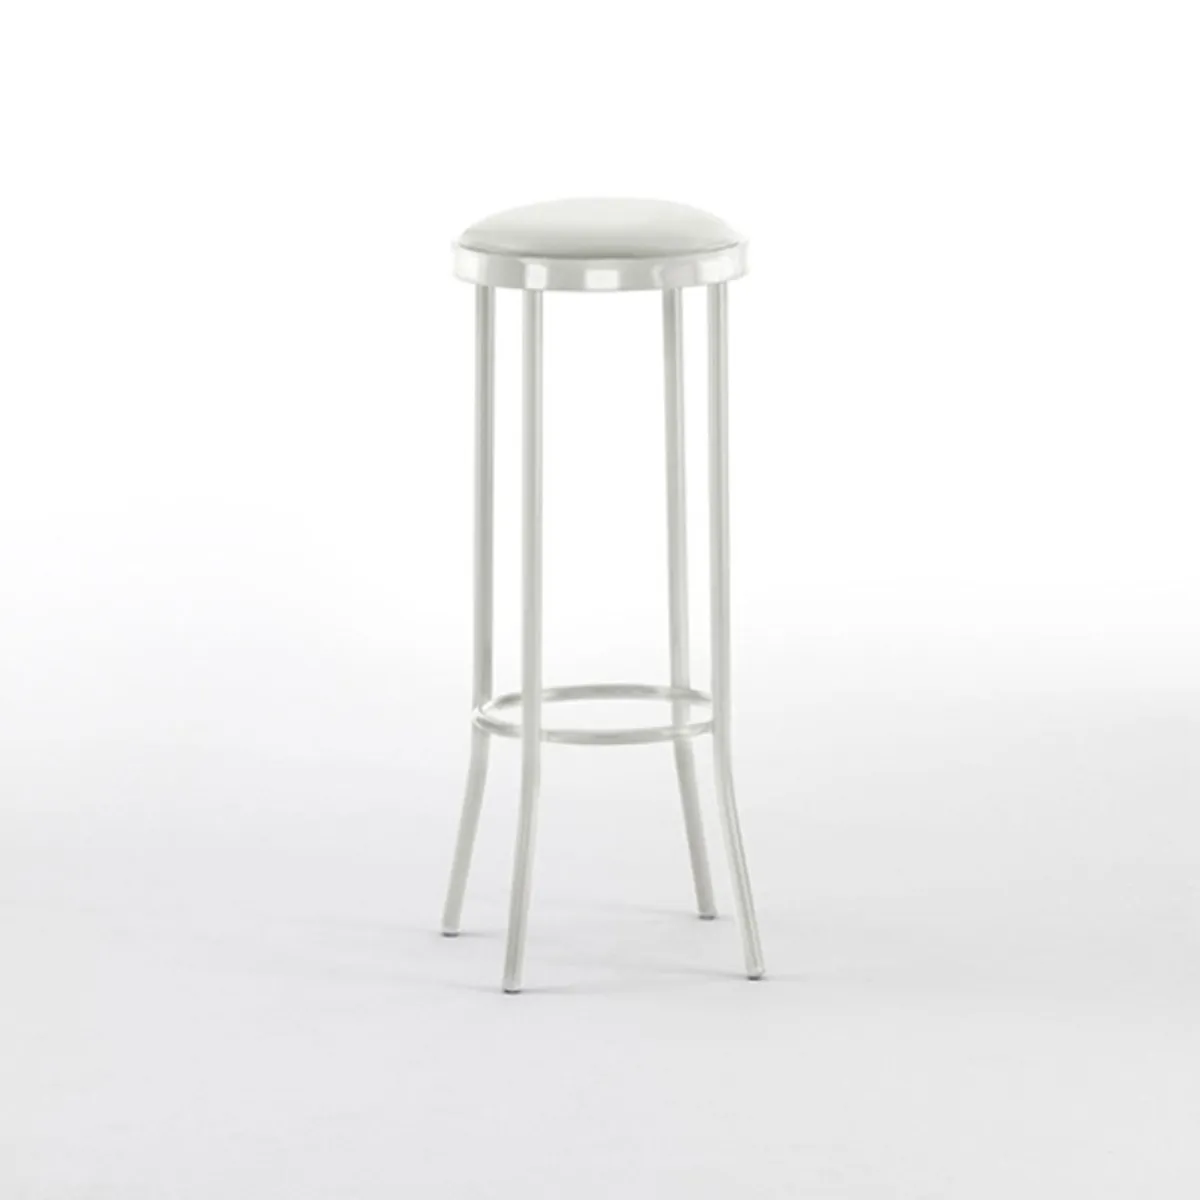 Web Embleton Stool In White With Seat Pad